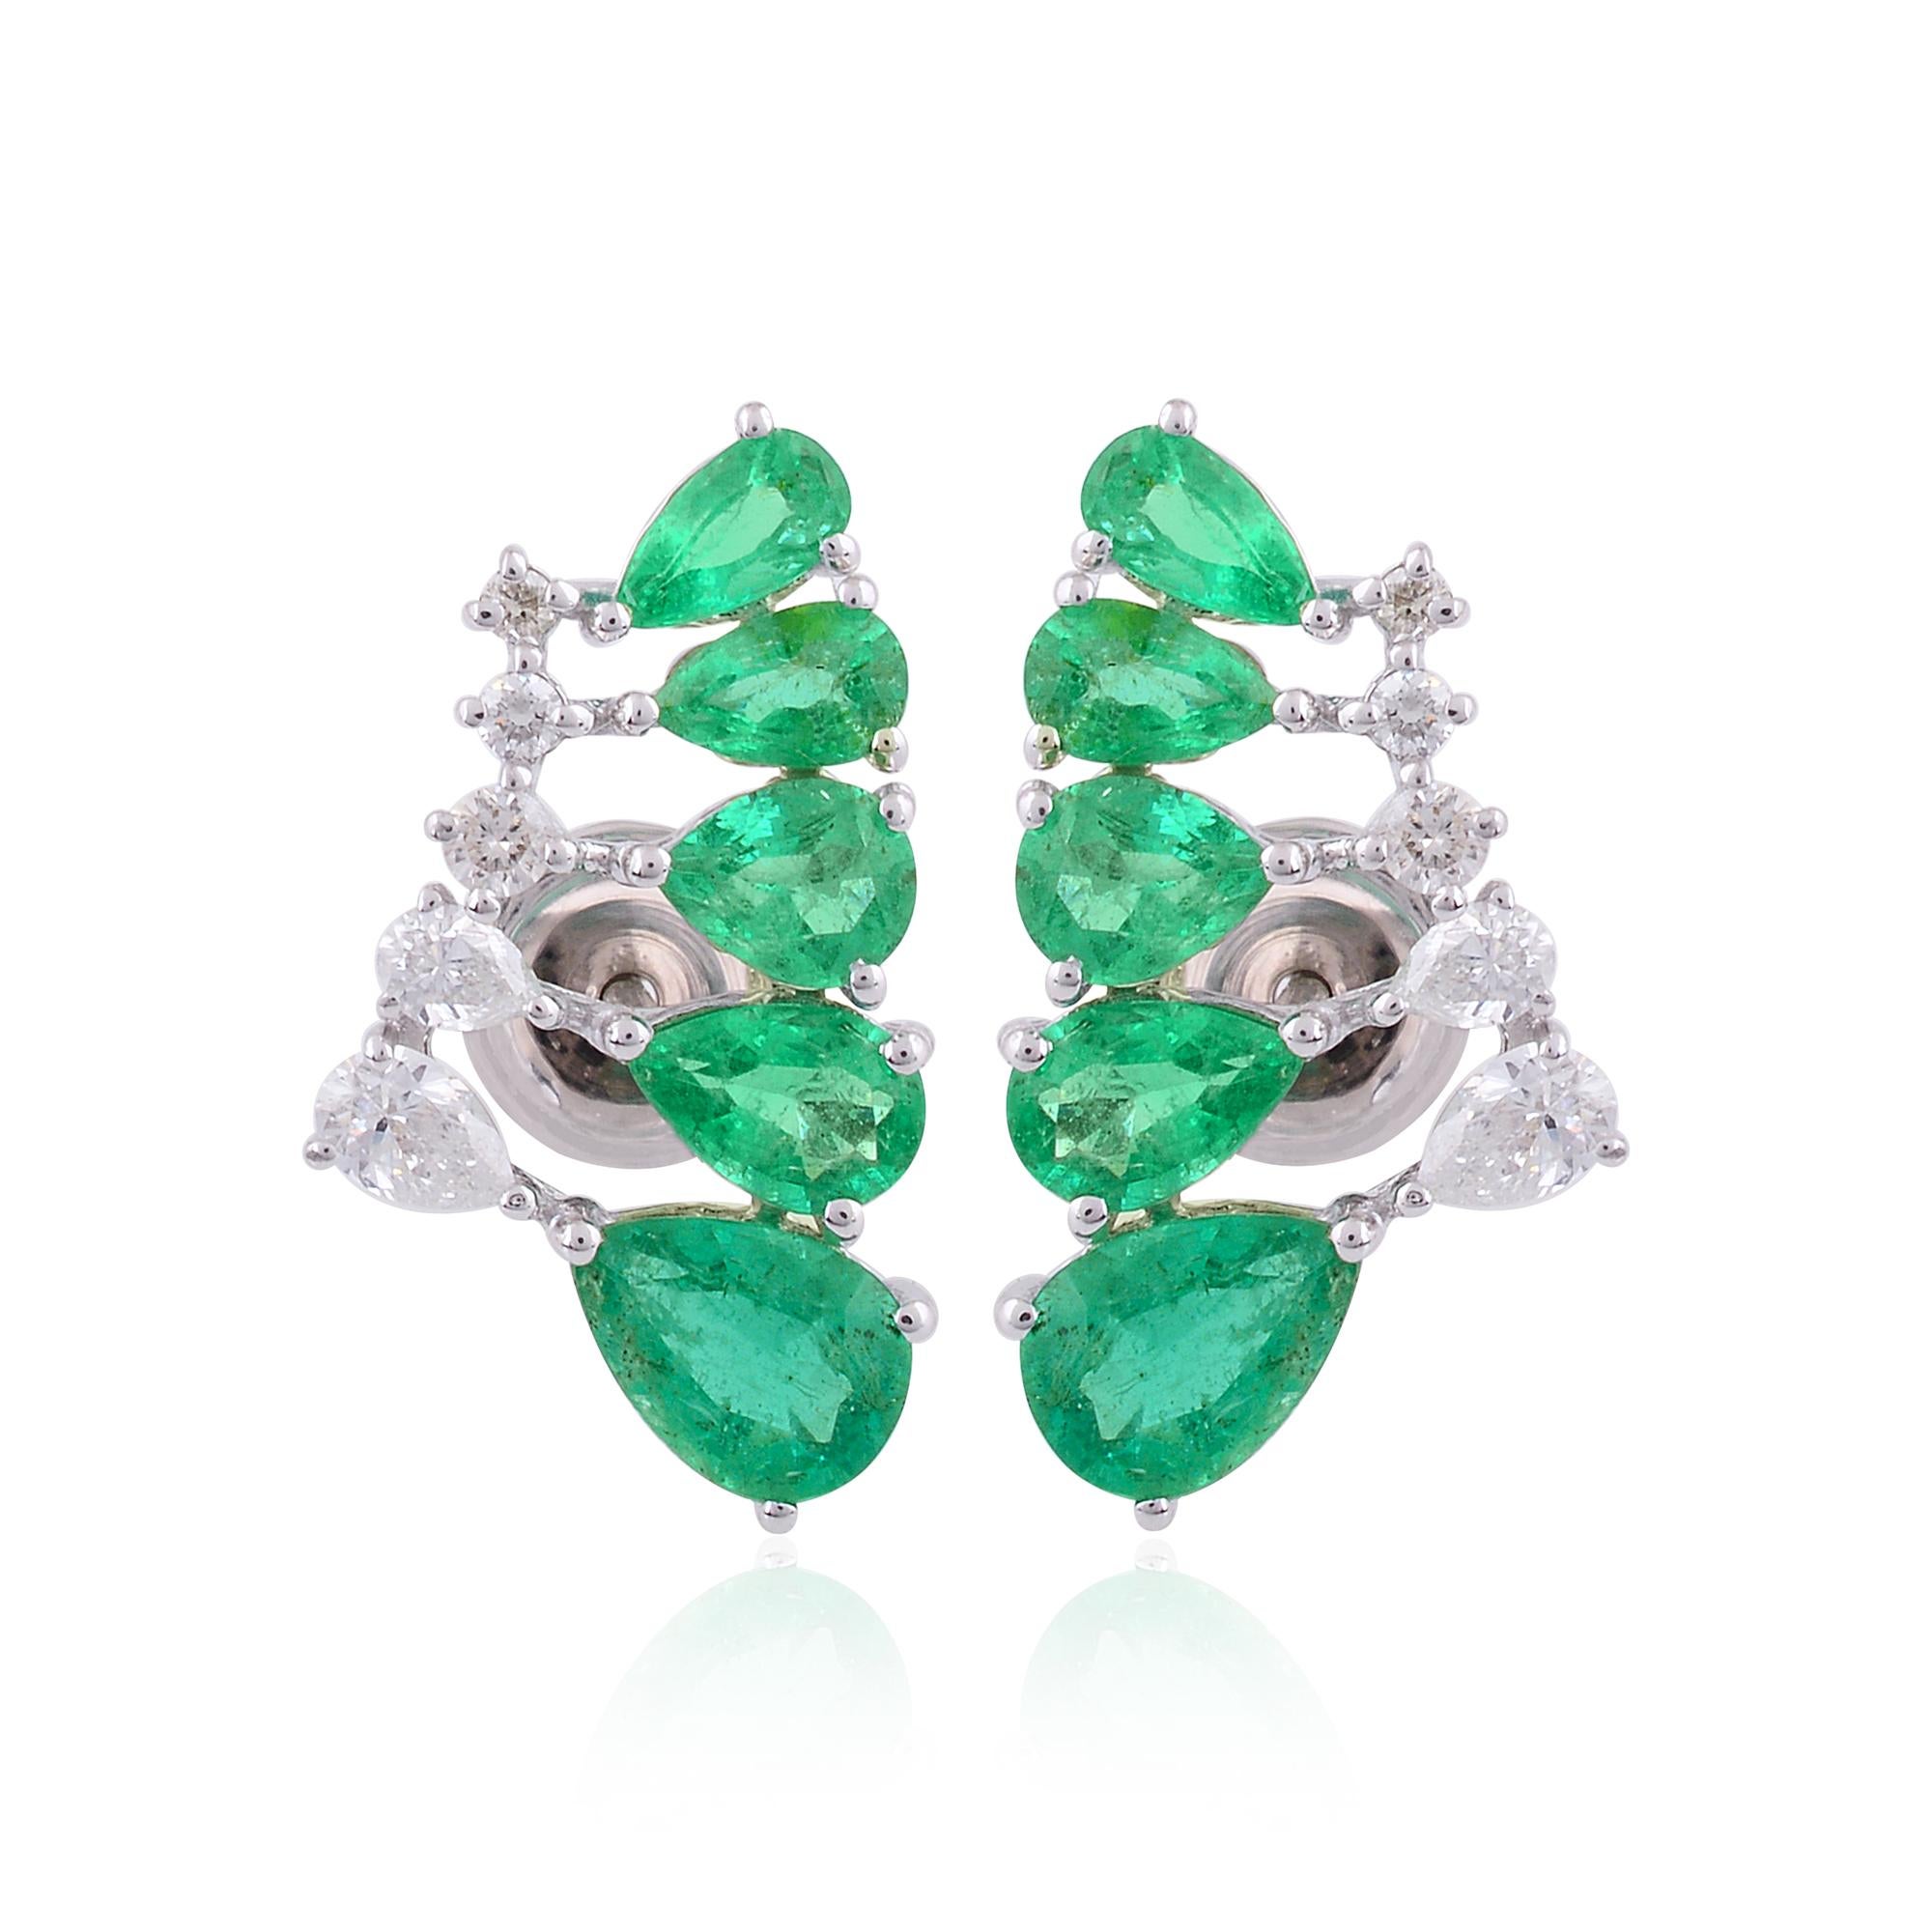 At the heart of each earring rests a dazzling pear-shaped Zambian emerald, renowned for its mesmerizing green hue and exceptional clarity. These ethically sourced emeralds exhibit a captivating depth of color, reminiscent of lush forests and